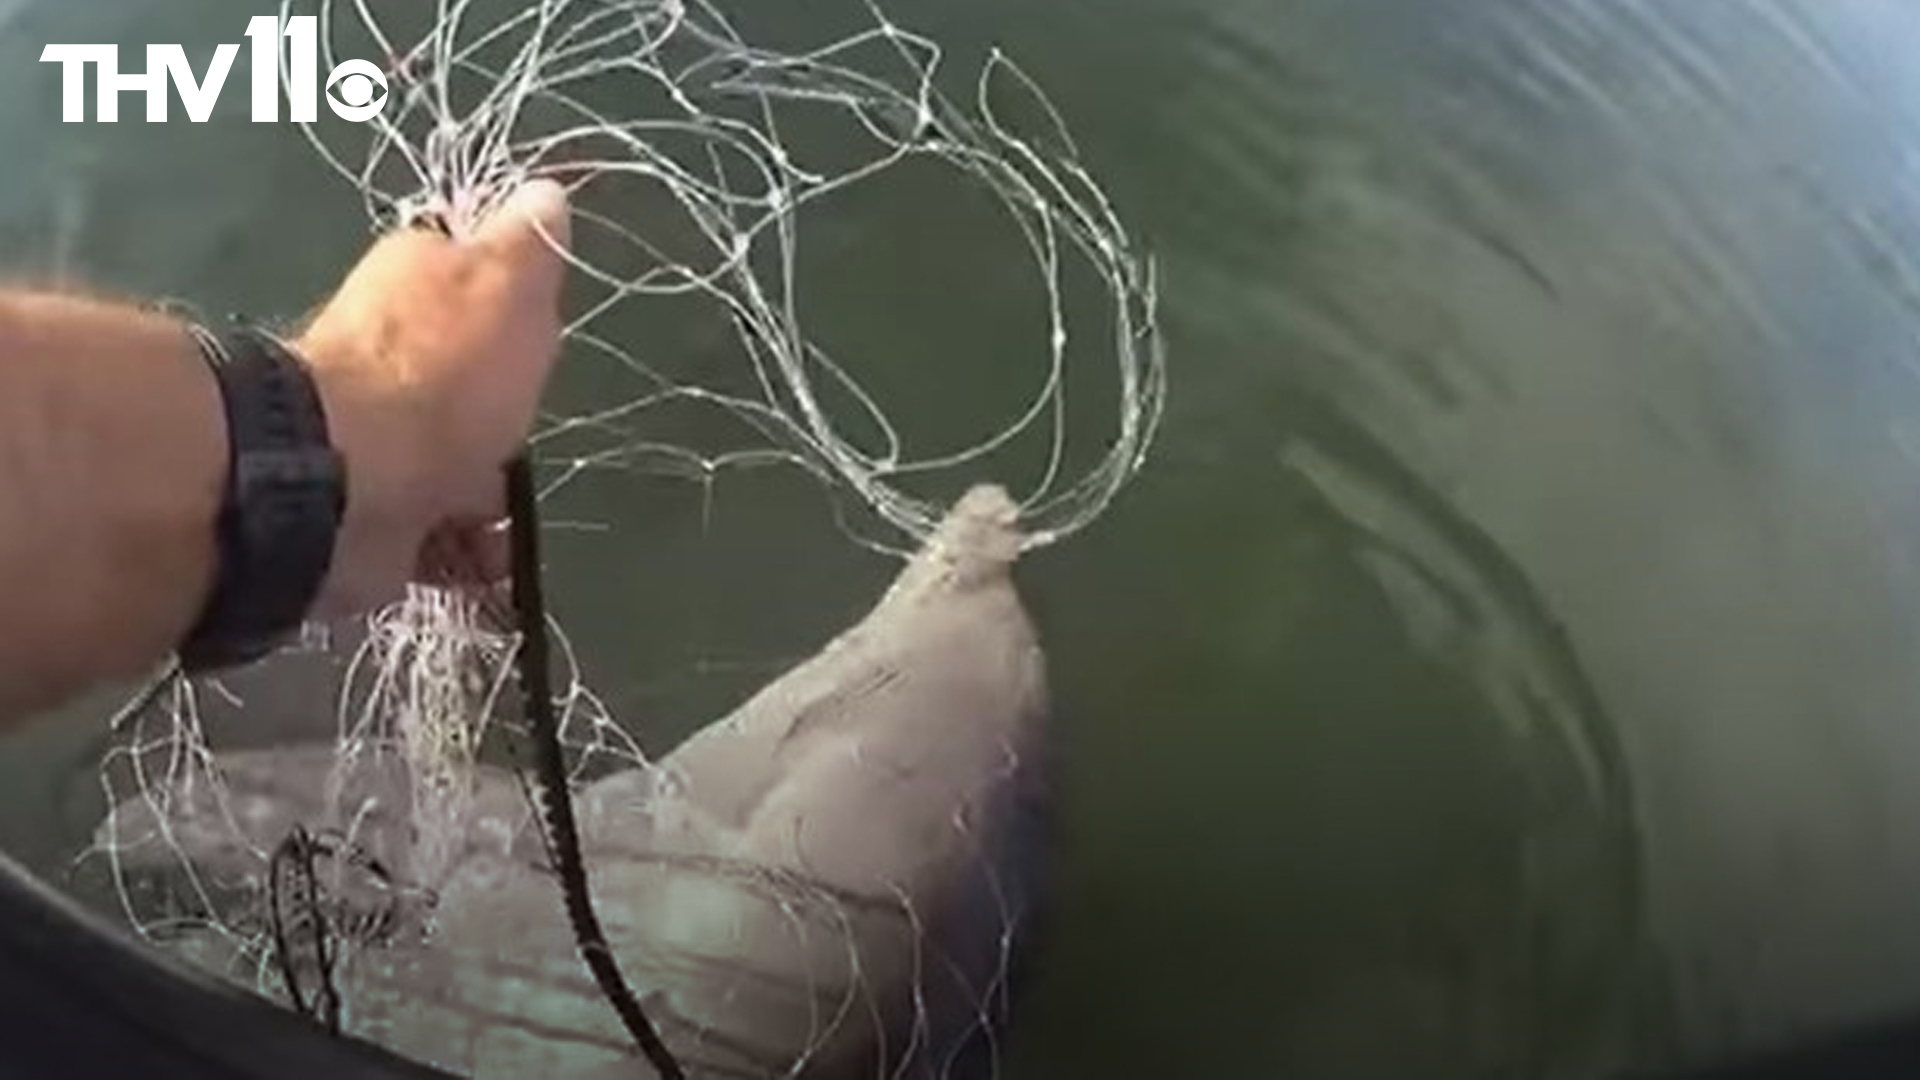 A marine patrol officer rescued a dolphin trapped in a fishing net in Miami-Dade County, Florida recently. The officer used a pocketknife to cut the net and free it.